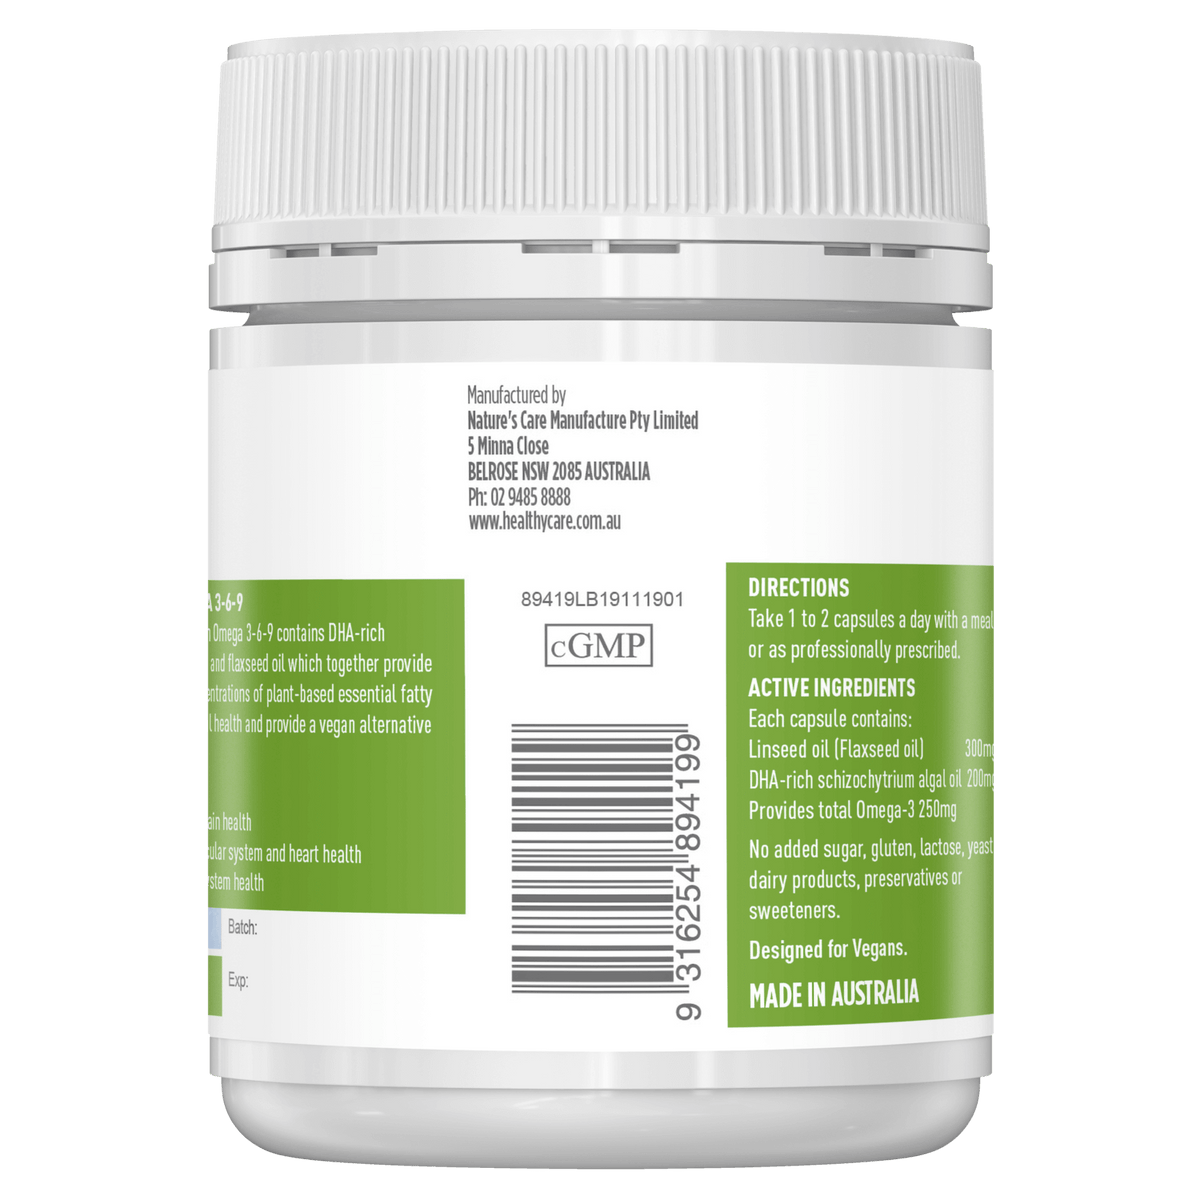 Manufacturer and Barcode of Pure Vegan Omega 3-6-9 60 Capsules-Healthy Care Australia